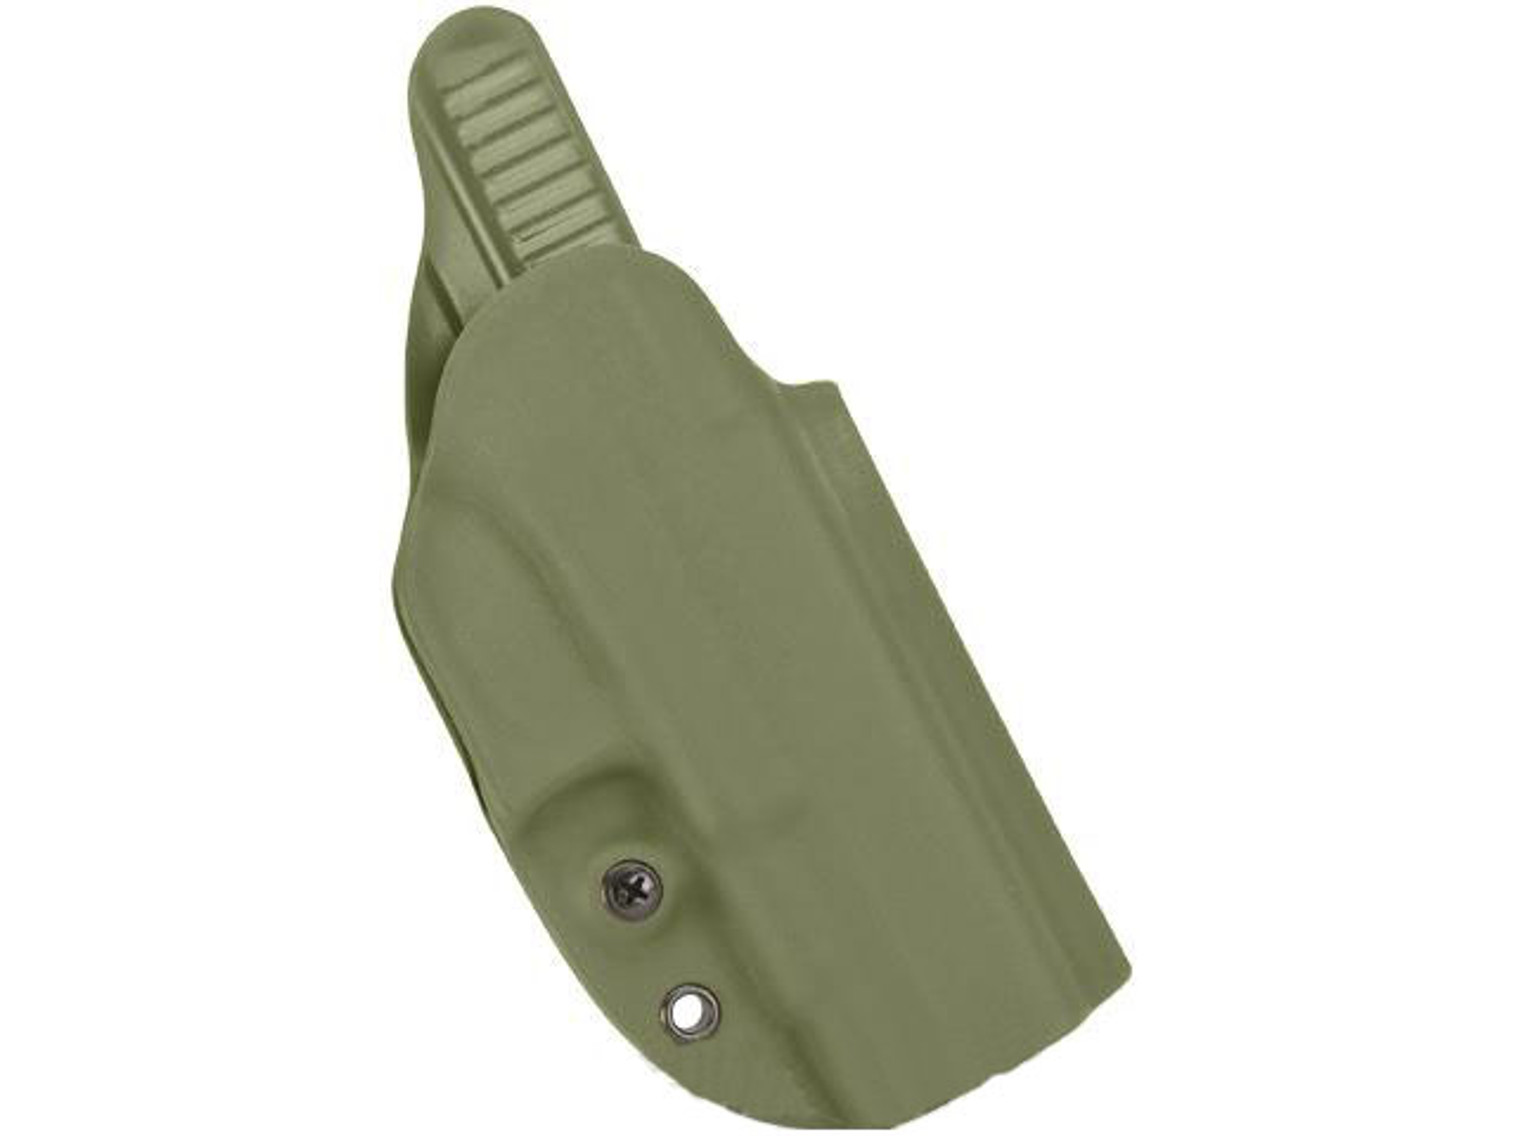 G-Code OSH-RTI Kydex Holster for Glock 20, 21 (Right / OD Green)